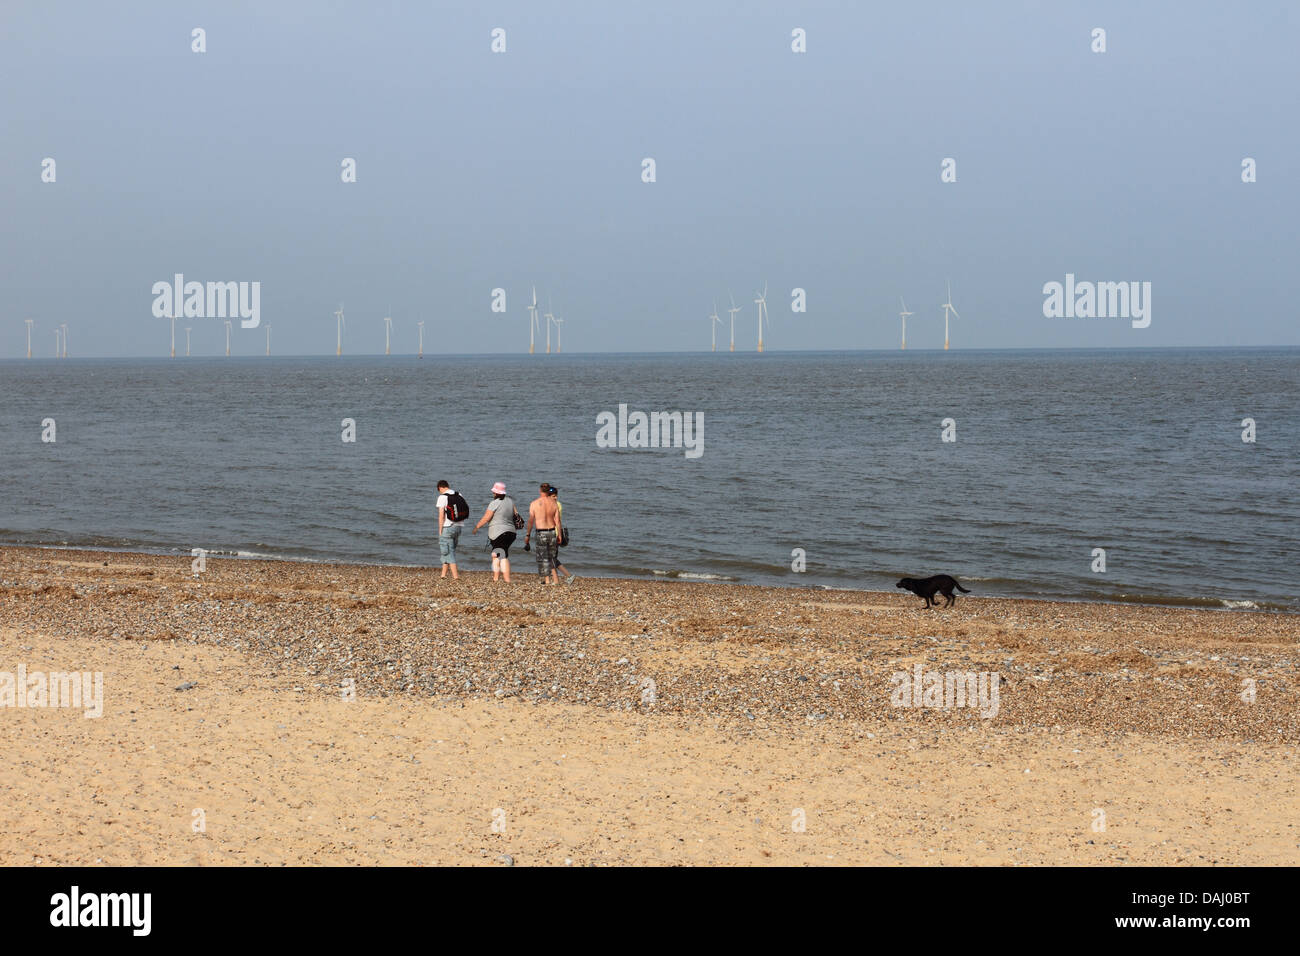 People walk on the beach, Holiday makers enjoying on Great Yarmouth beach, Scroby wind turbine at rear,Norfolk,UK Stock Photo